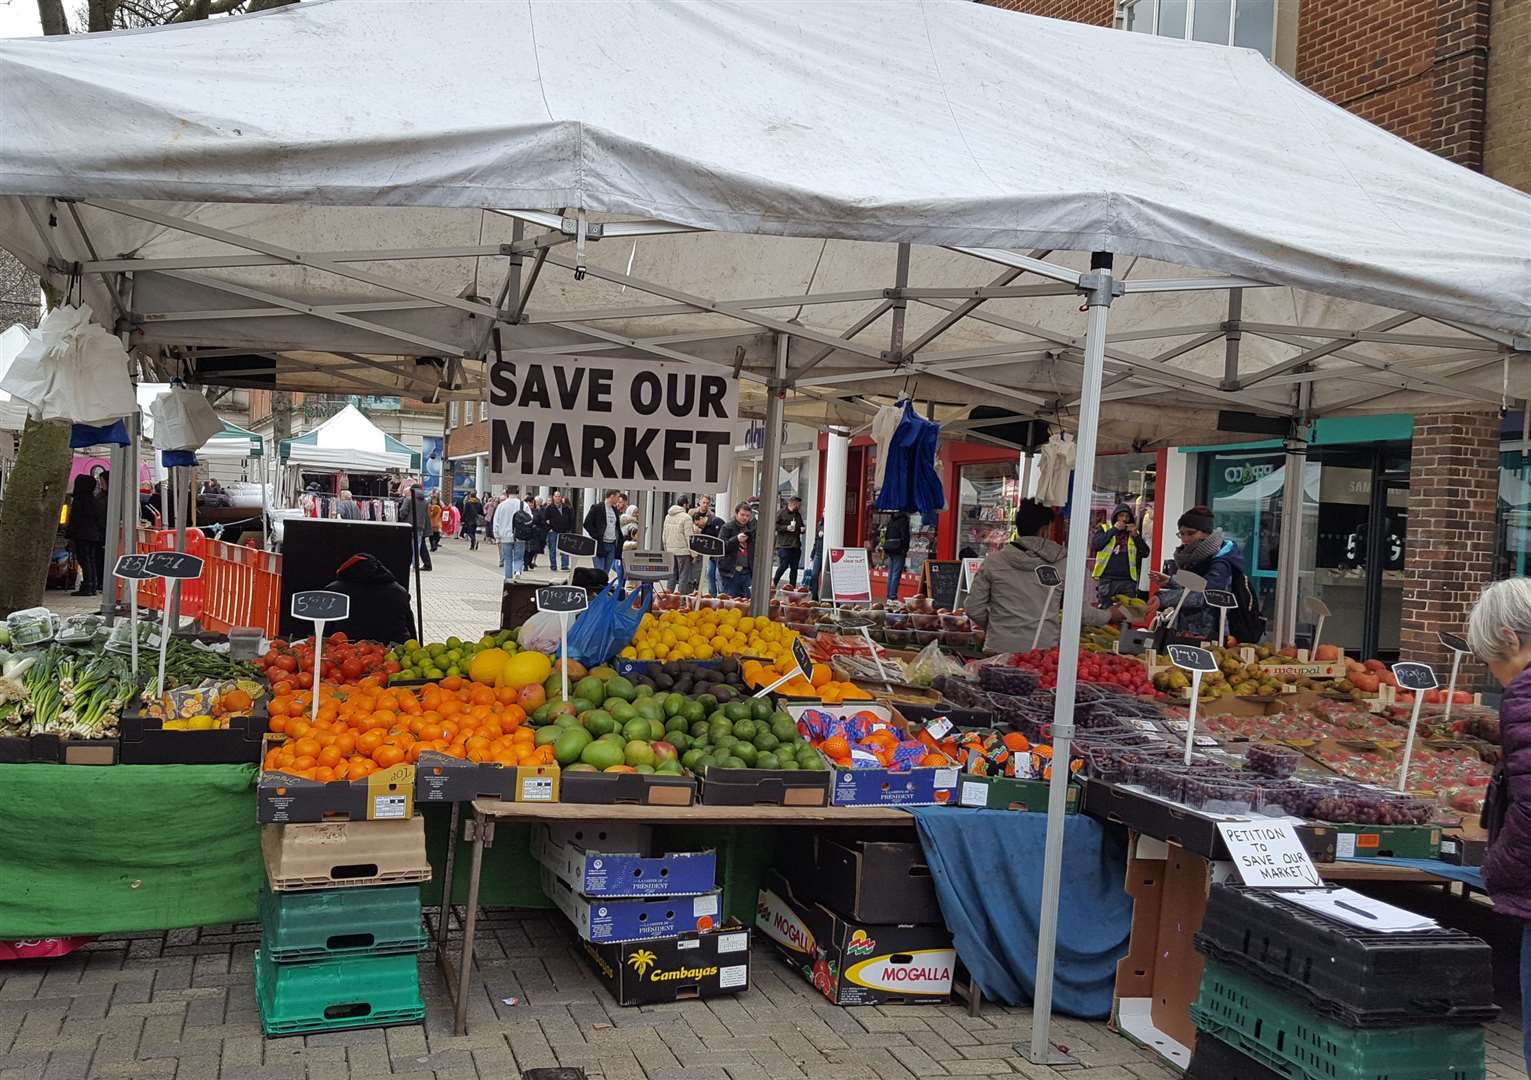 Supporters led a campaign to save Canterbury Market